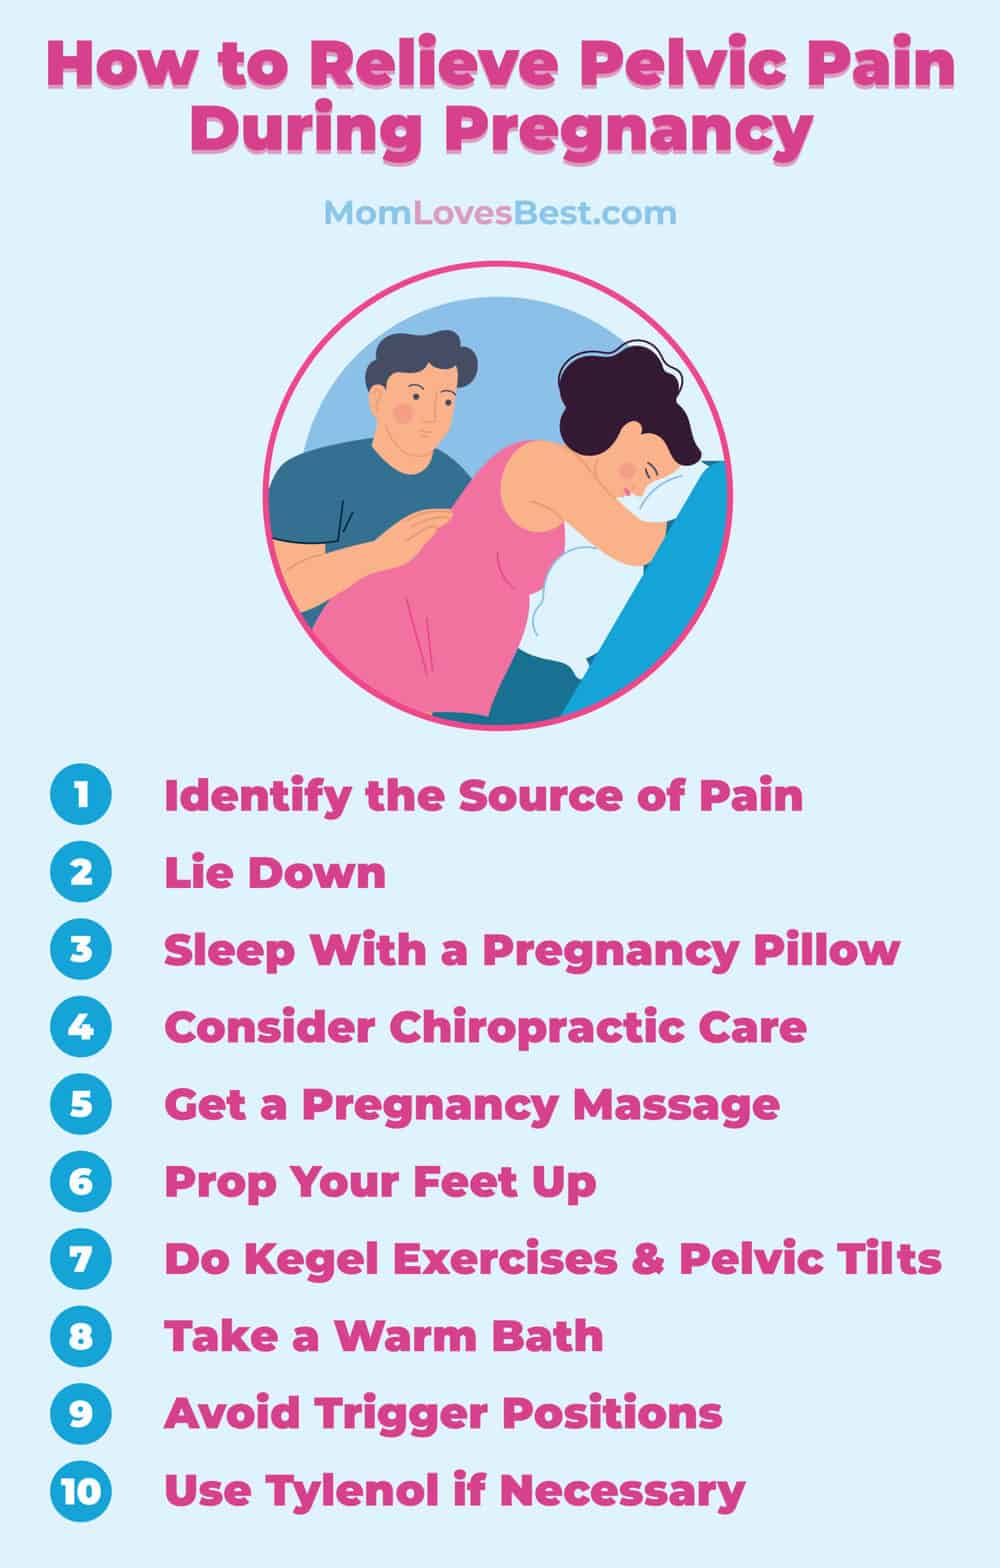 How to manage pelvic pain during pregnancy